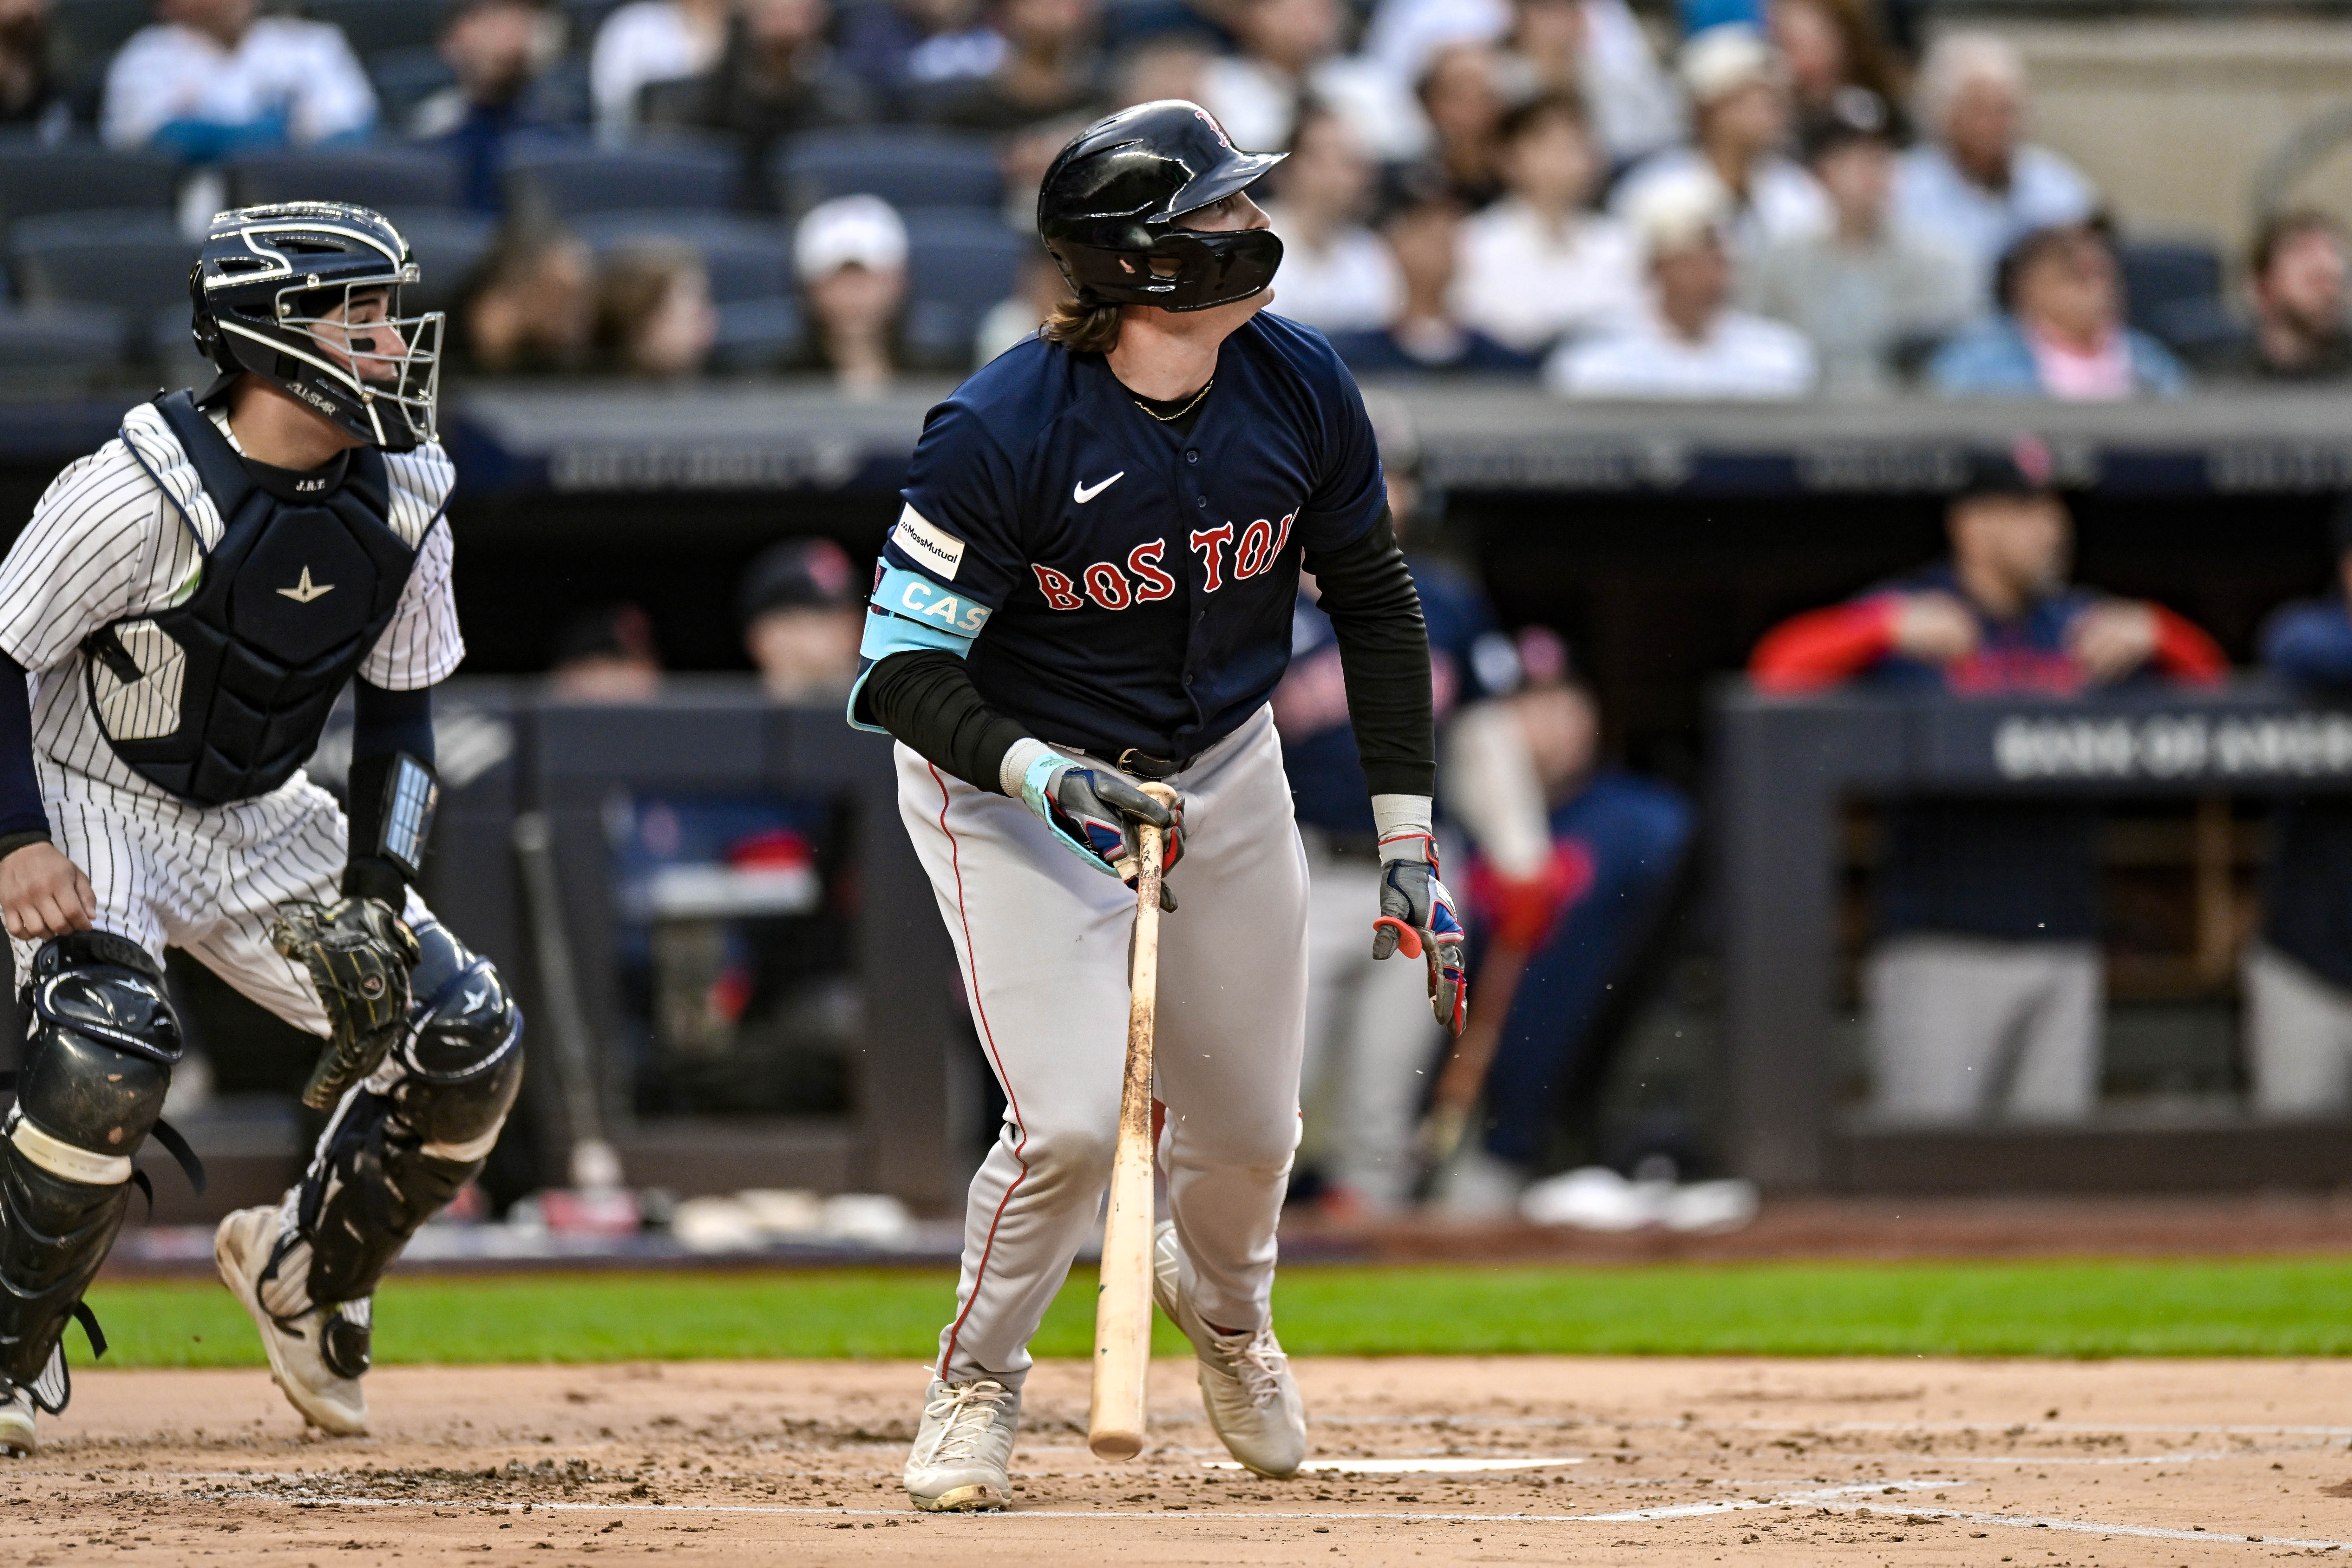 Red Sox Down Yankees 3-2 in 1st Meeting of 2023